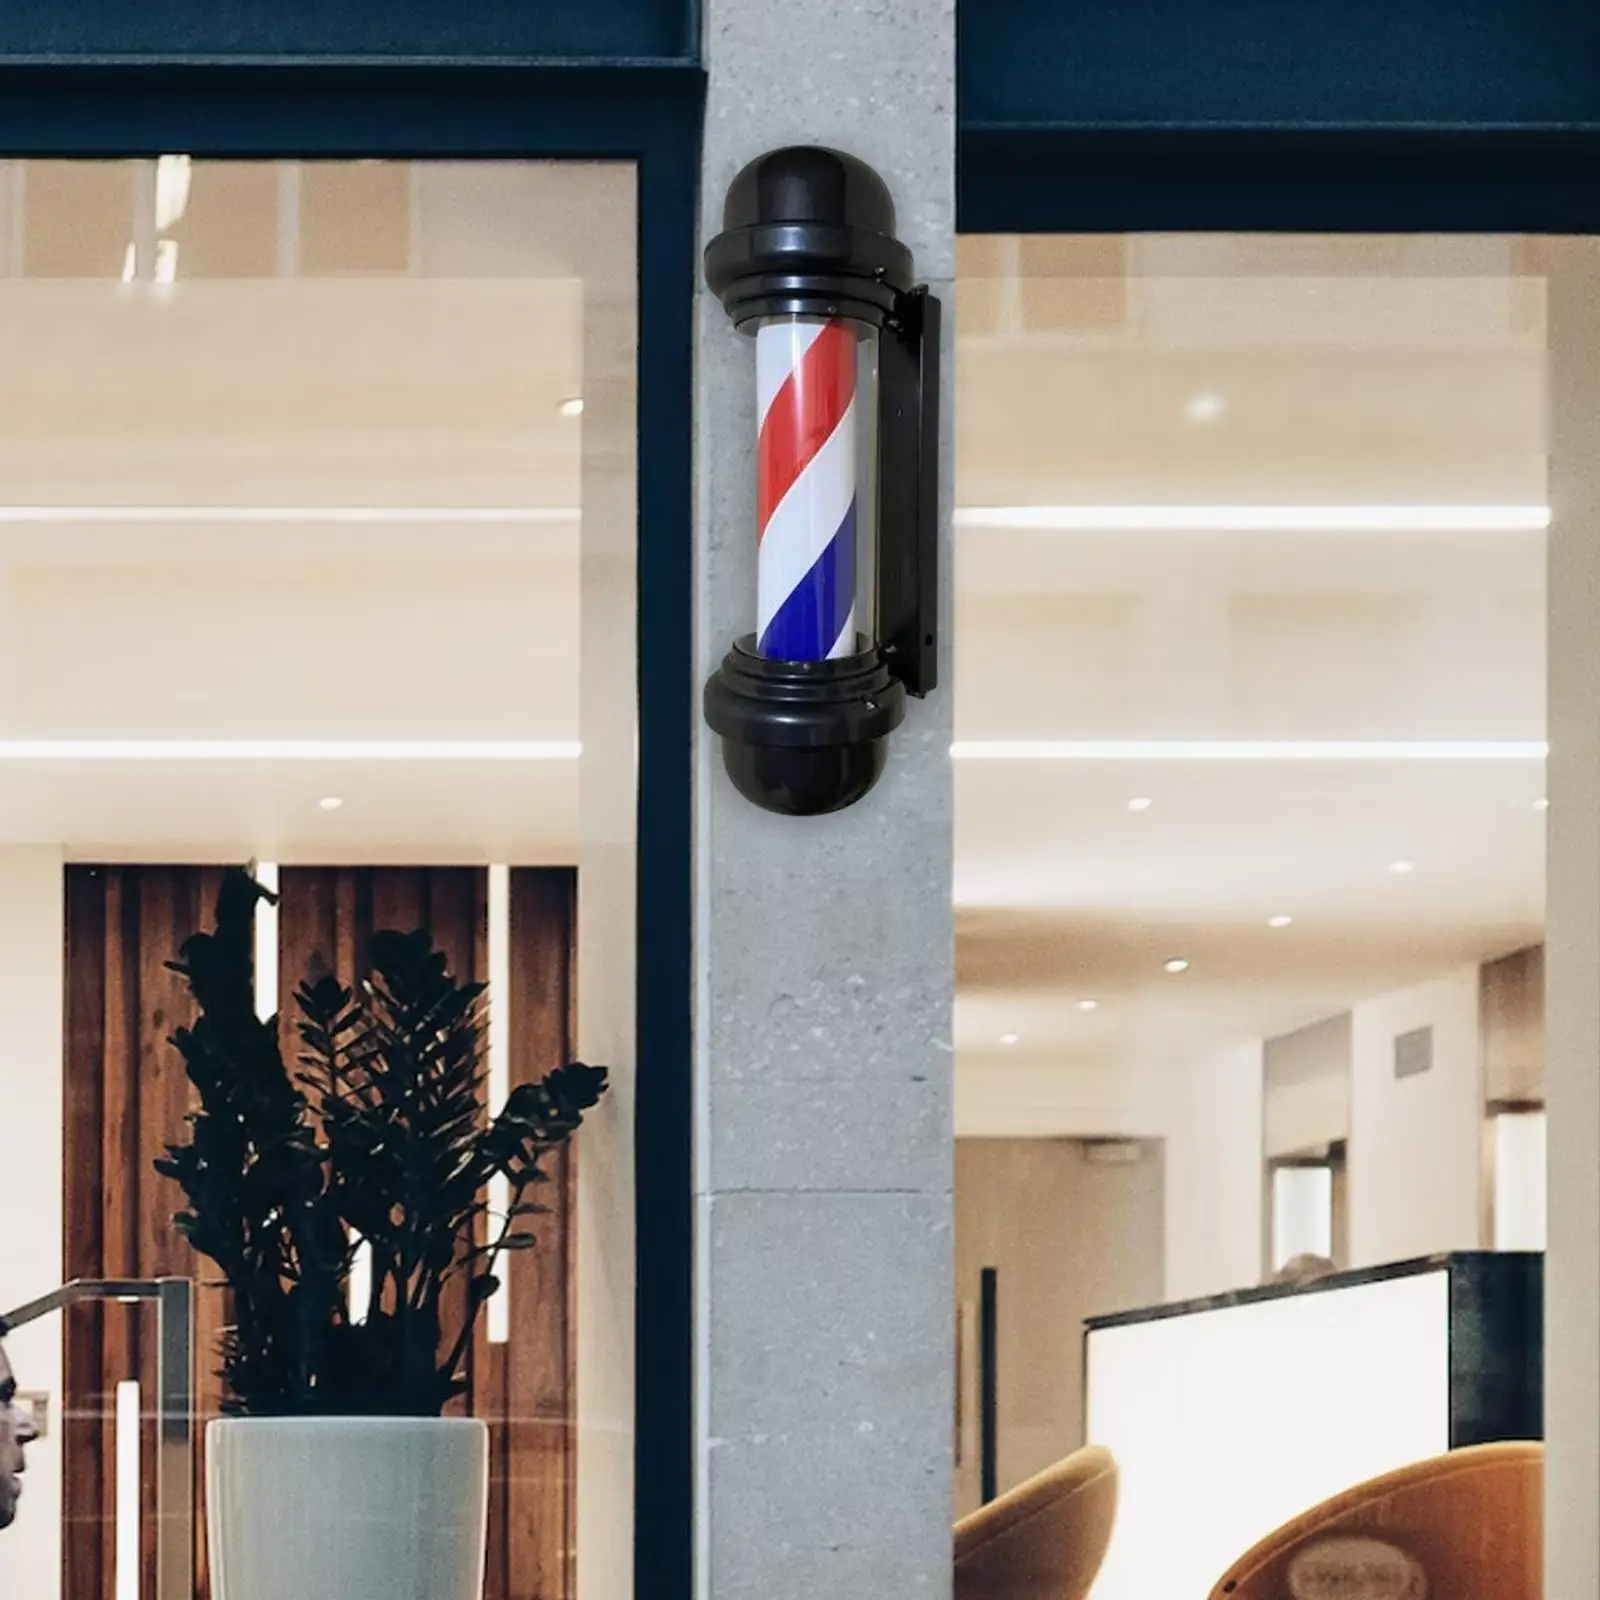 Barber Pole Light Rotating Sign Light Rainproof Hair Salon Stripes Wall Mounted Waterproof Retro Style LED for Indoor Entrance